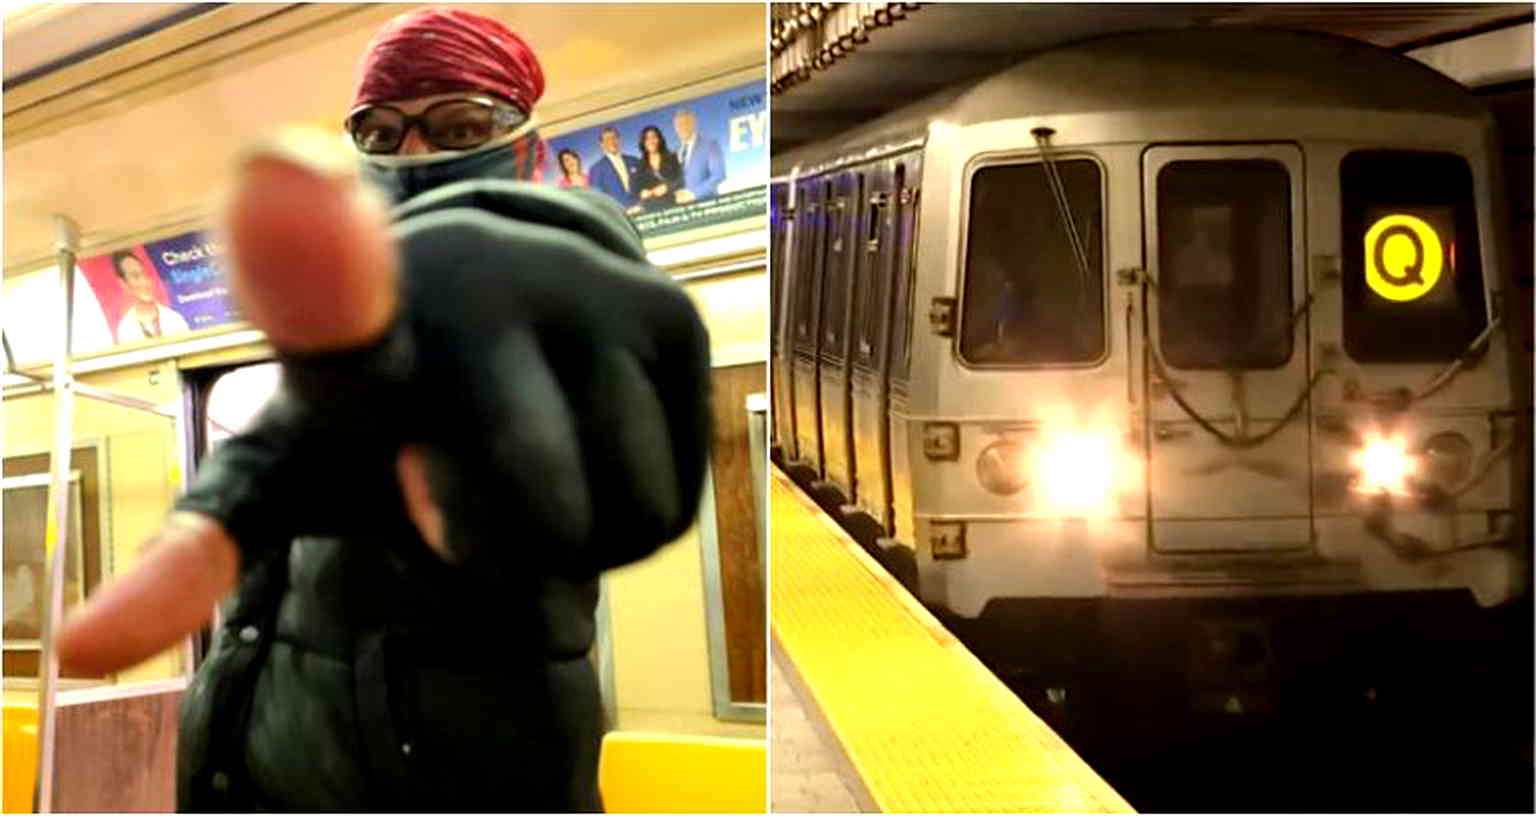 Homeless Man Chases Away Anti-Asian Harasser on NYC Train as Bystanders Watched